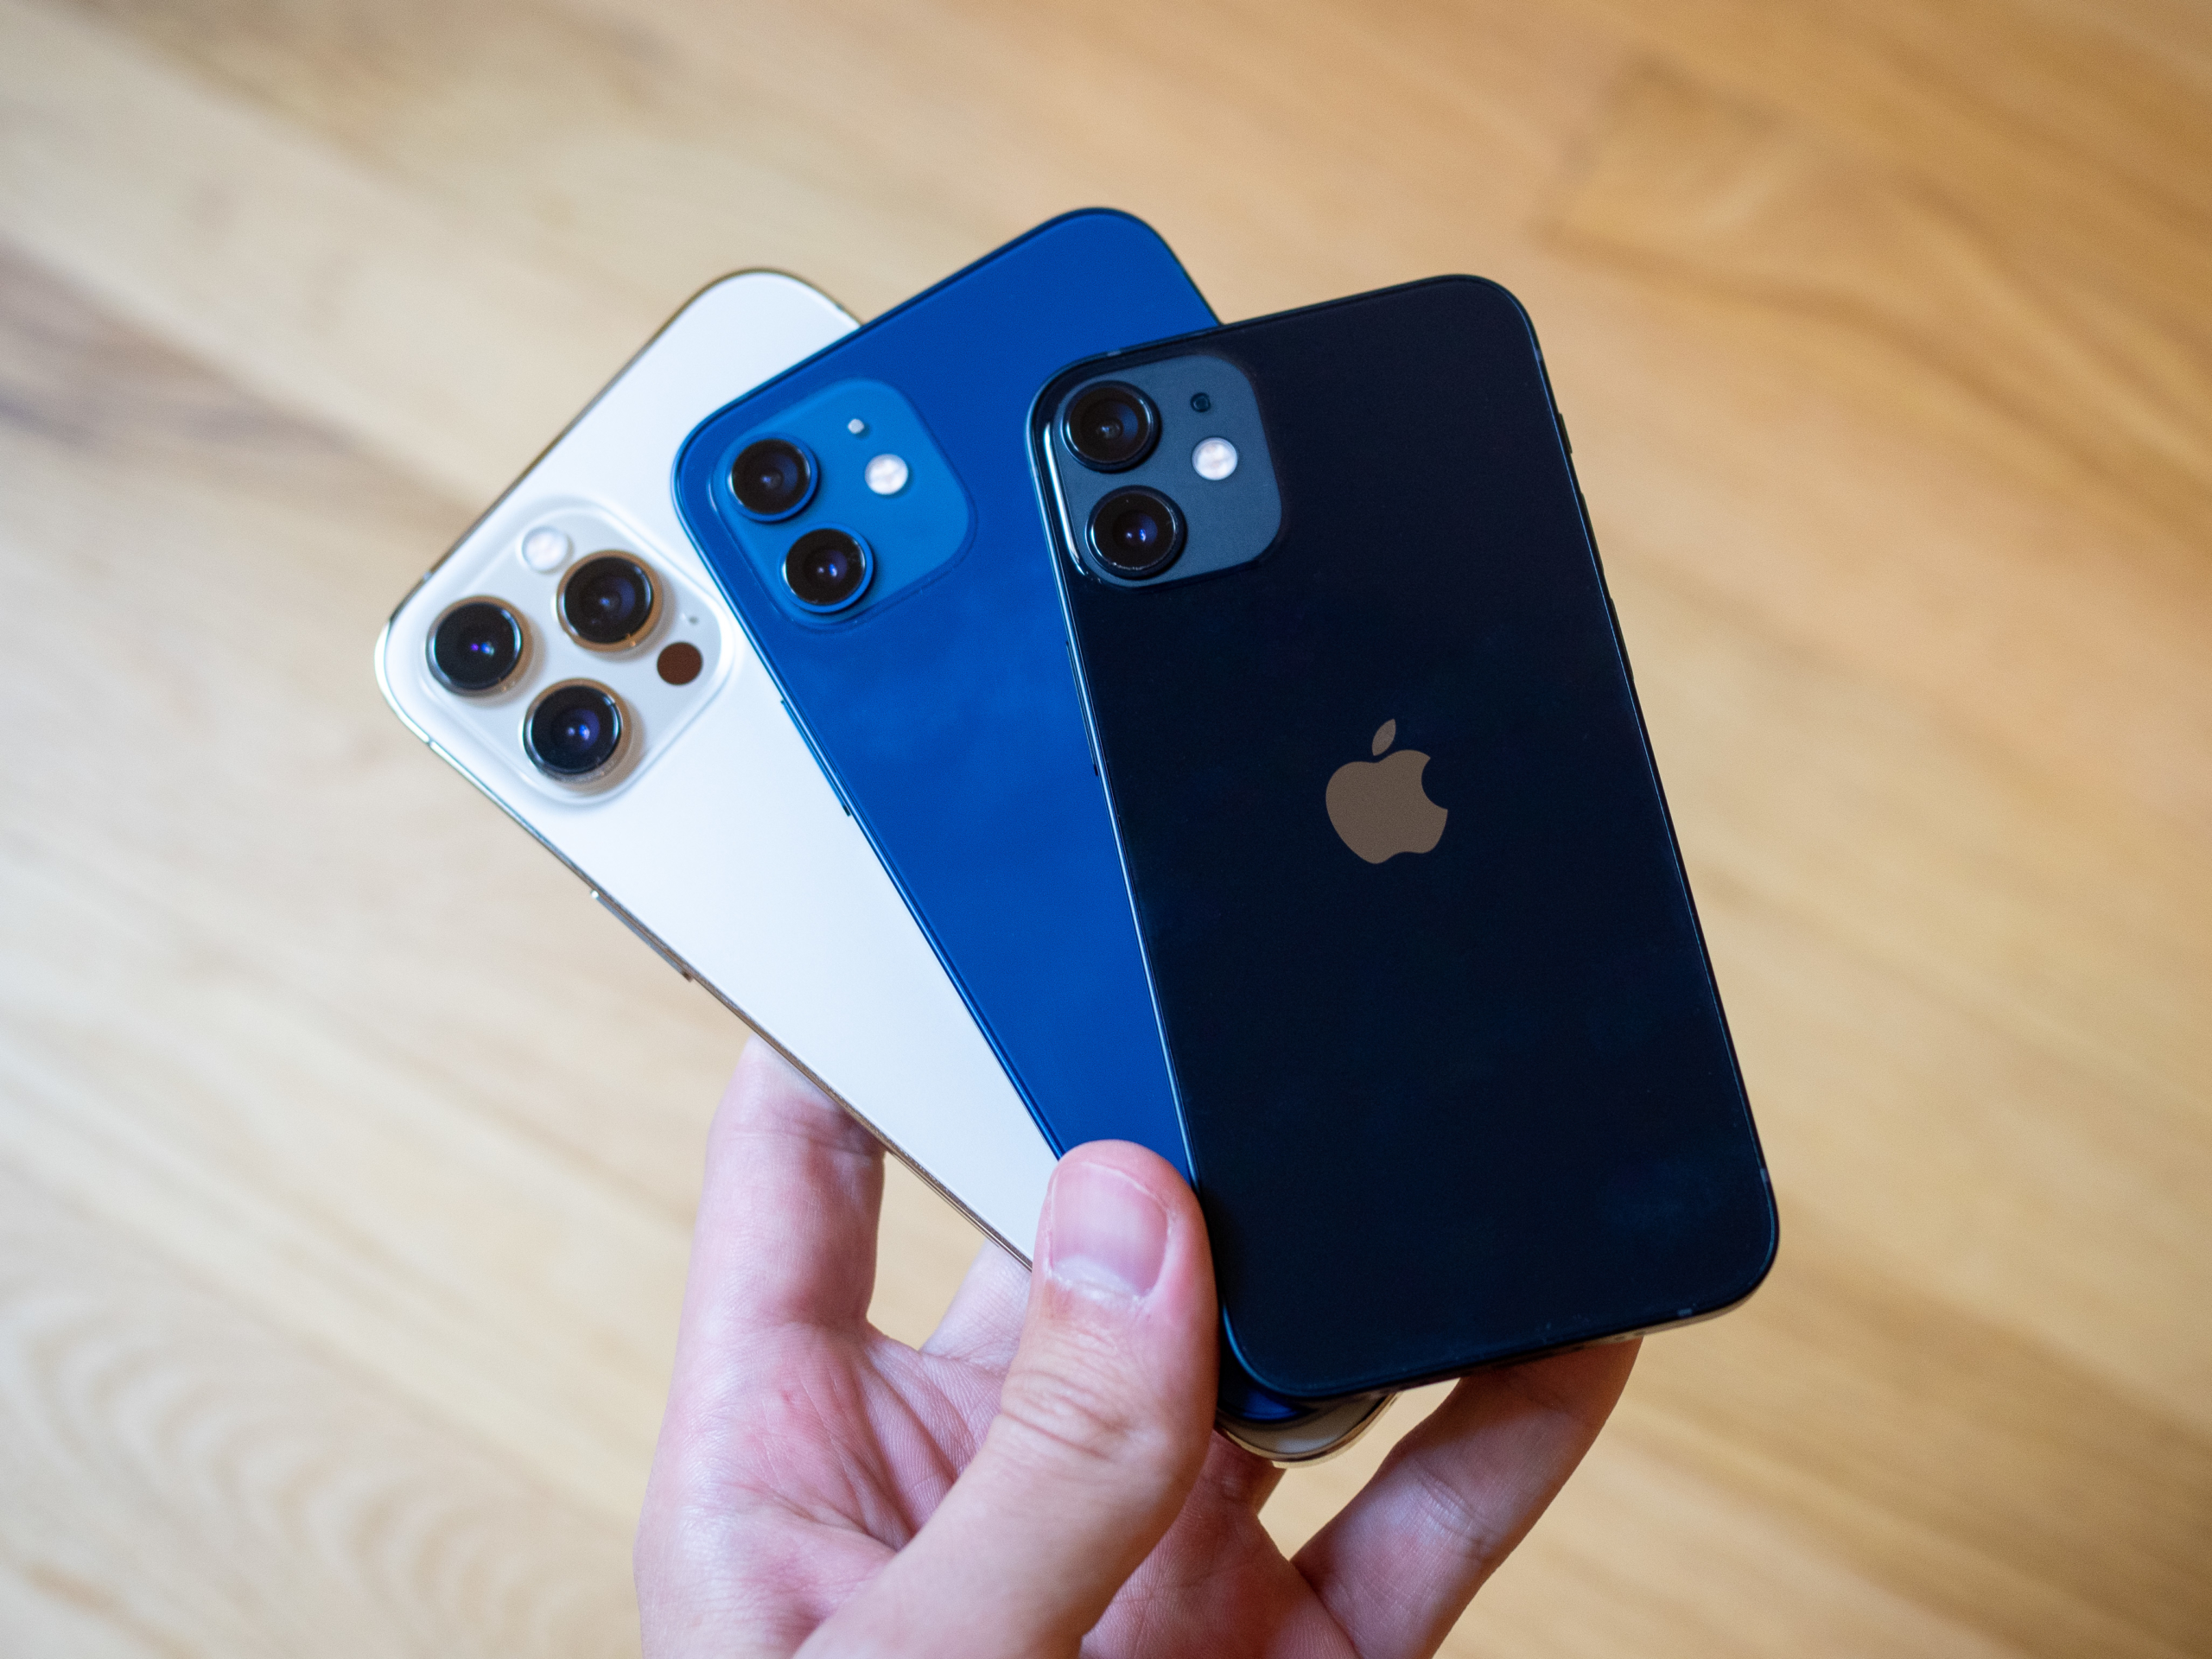 iPhone 12 Mini and iPhone 12 Pro Max review - compact power or go